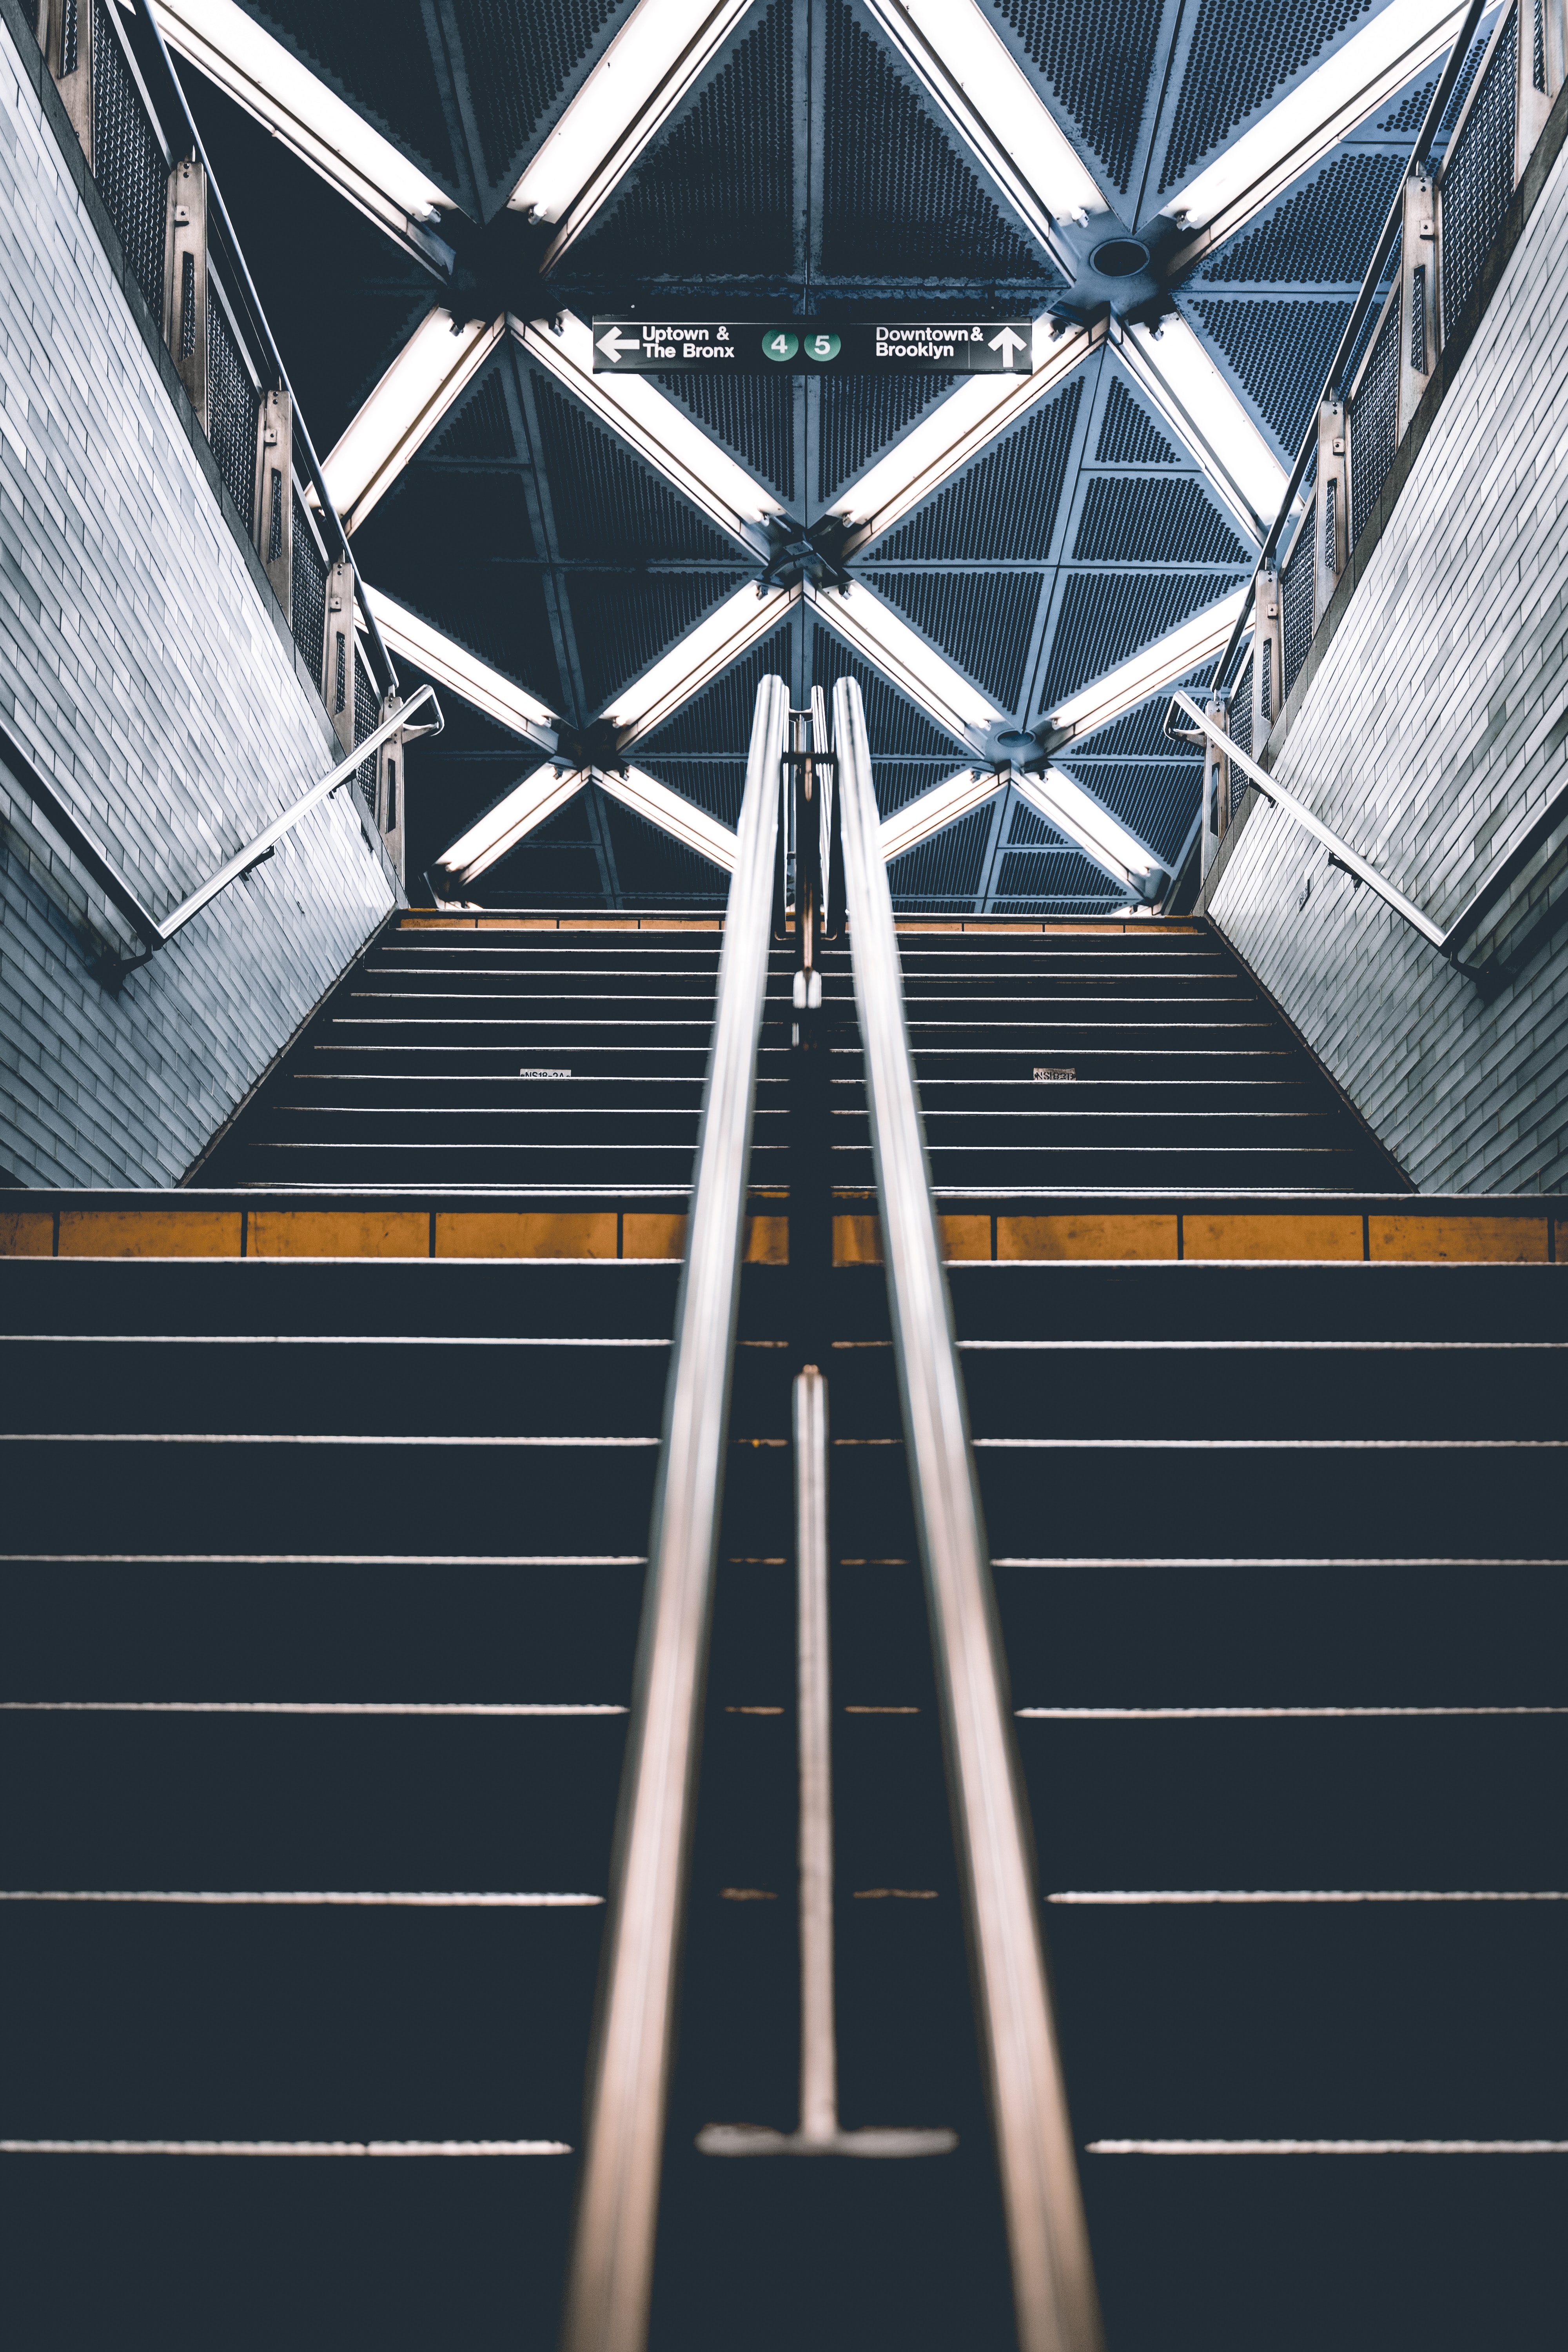 subway, miscellanea, miscellaneous, ladder, stairs, steps, metro, handrails, underground pass wallpapers for tablet